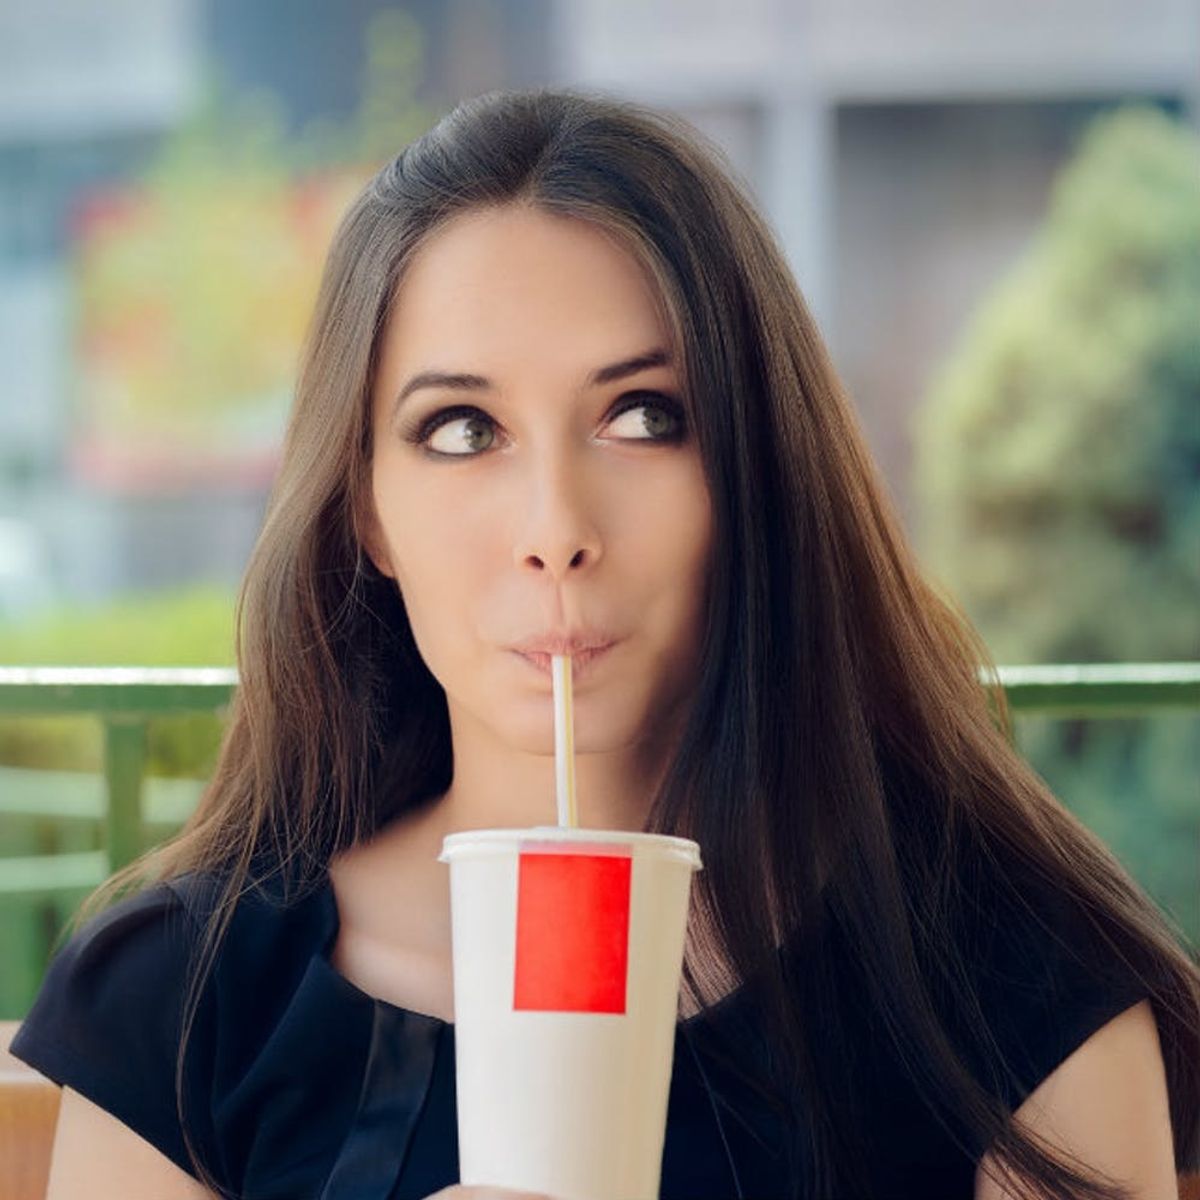 This Is Why Drinking Diet Soda Is So Bad for You